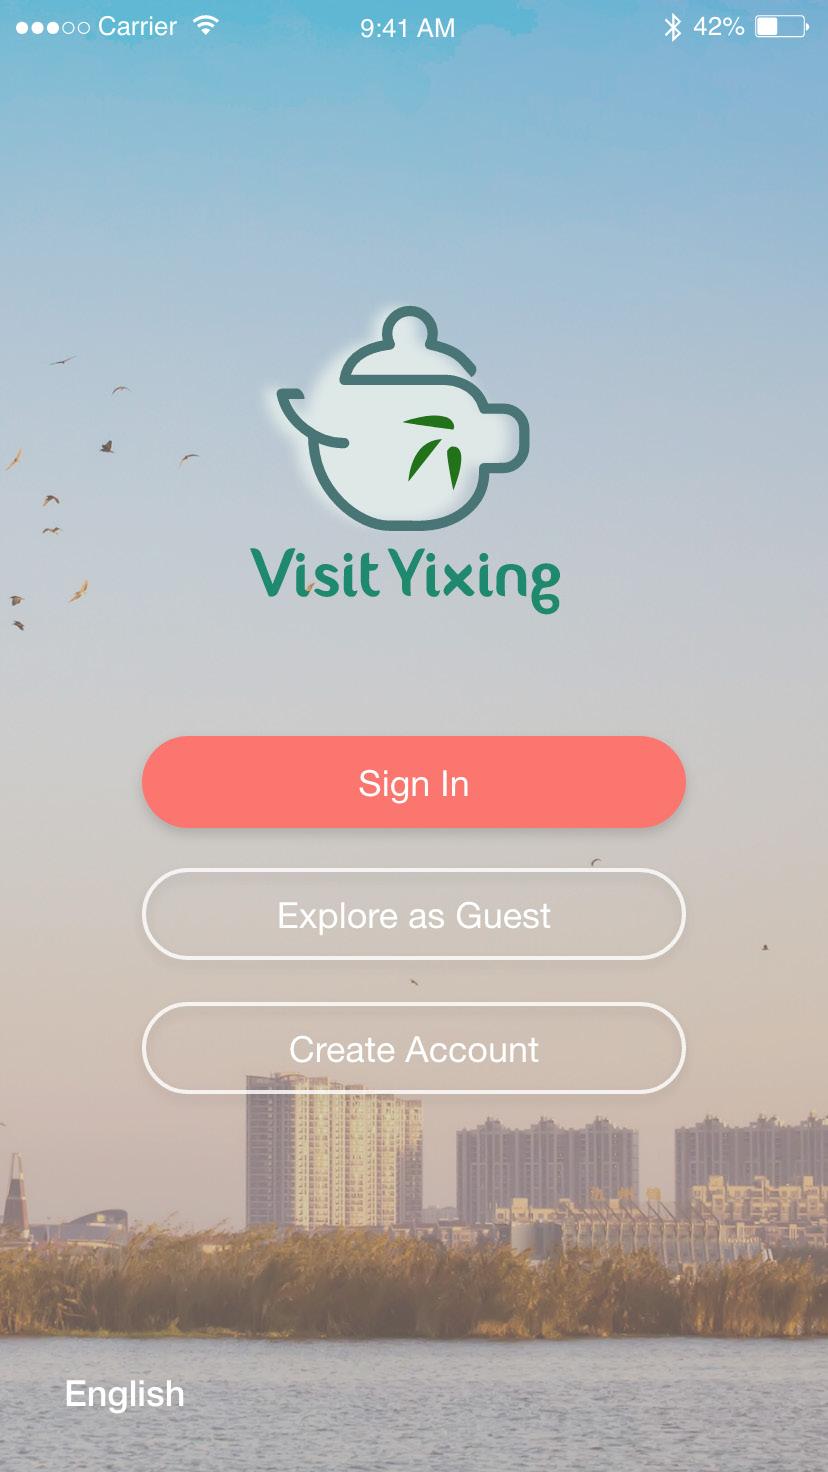 High Fidelity Prototype Screens After users enter the login screen, they can sign in if they have existing account, create an account or explore as a guest without an